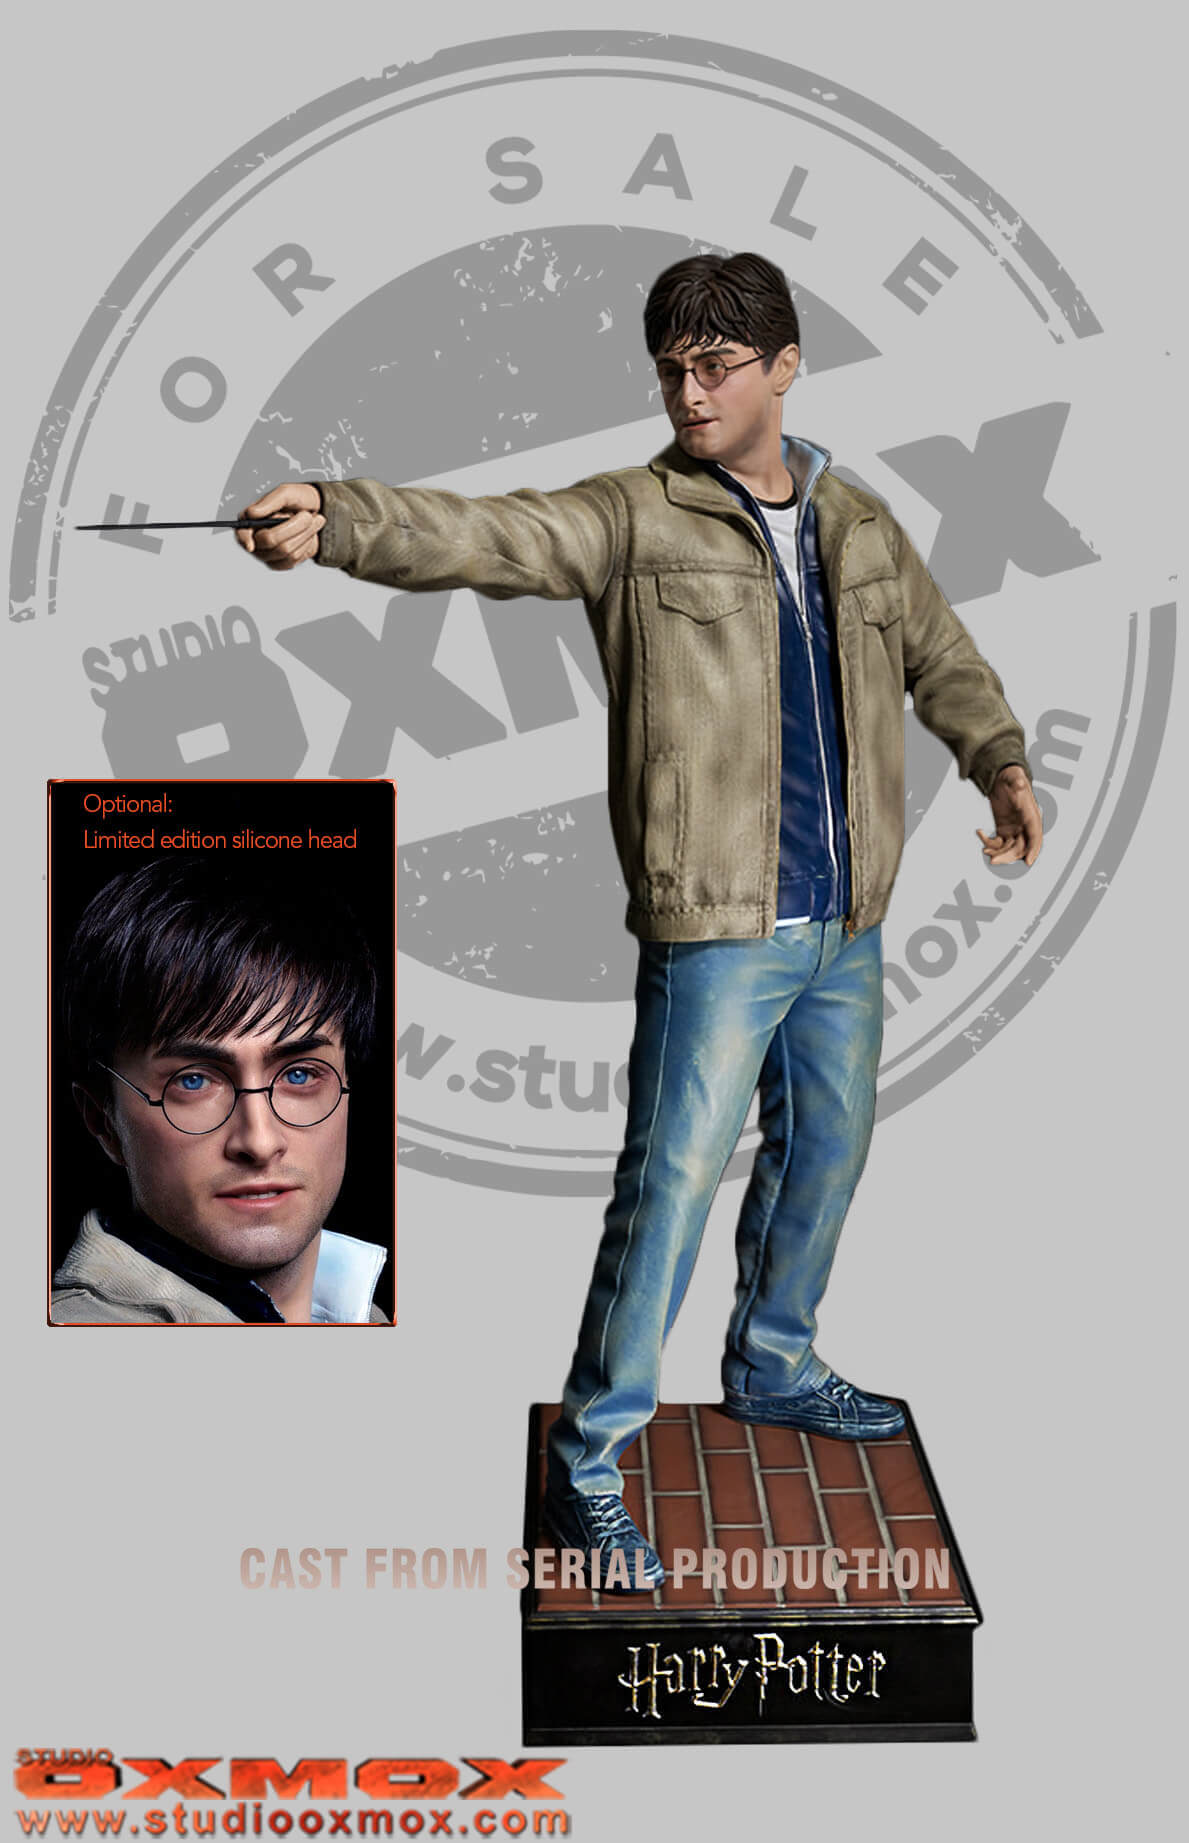 Harry Potter life size statue